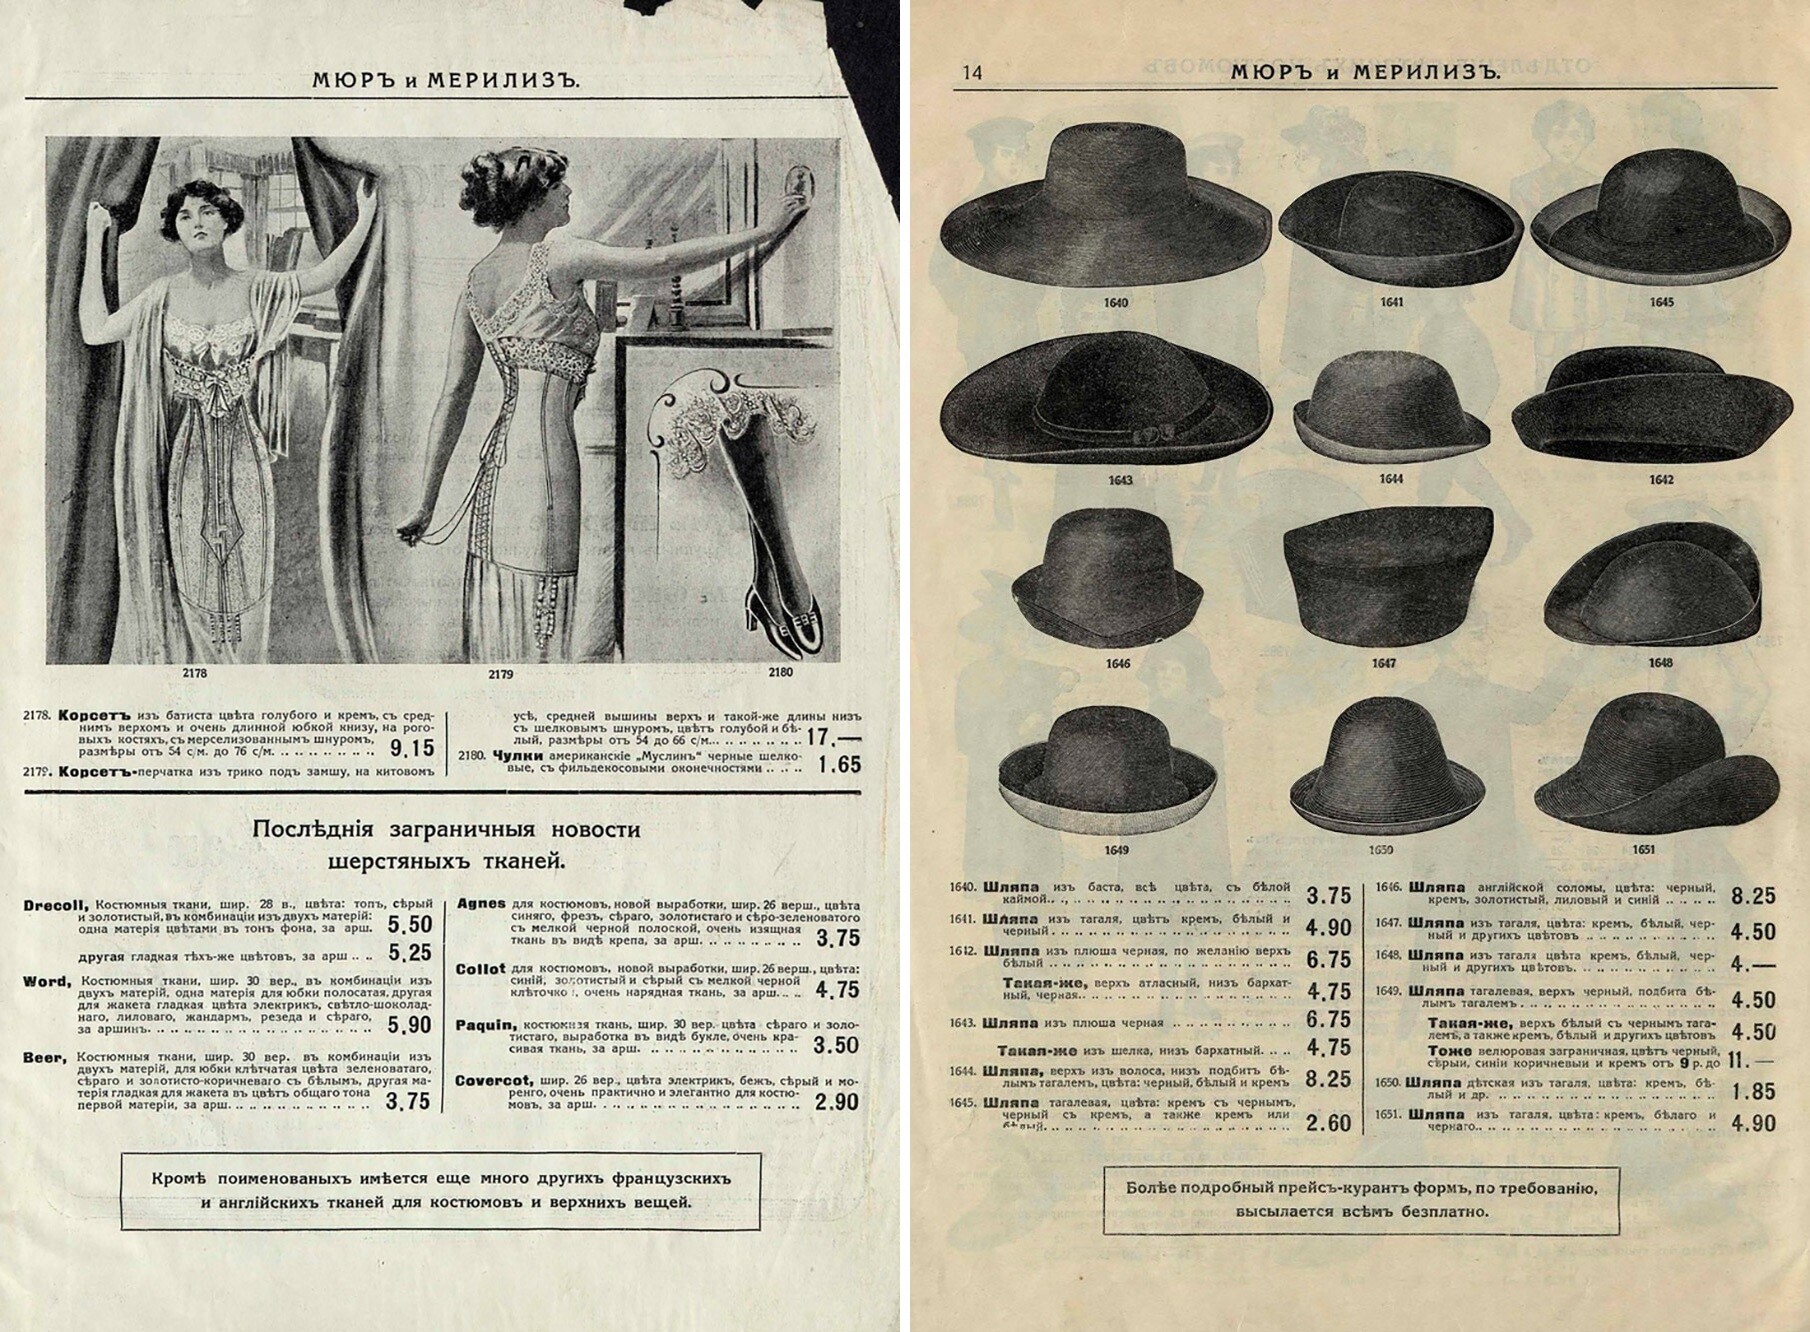 Pages from the 'Muir & Mirrielees' catalog, 1913